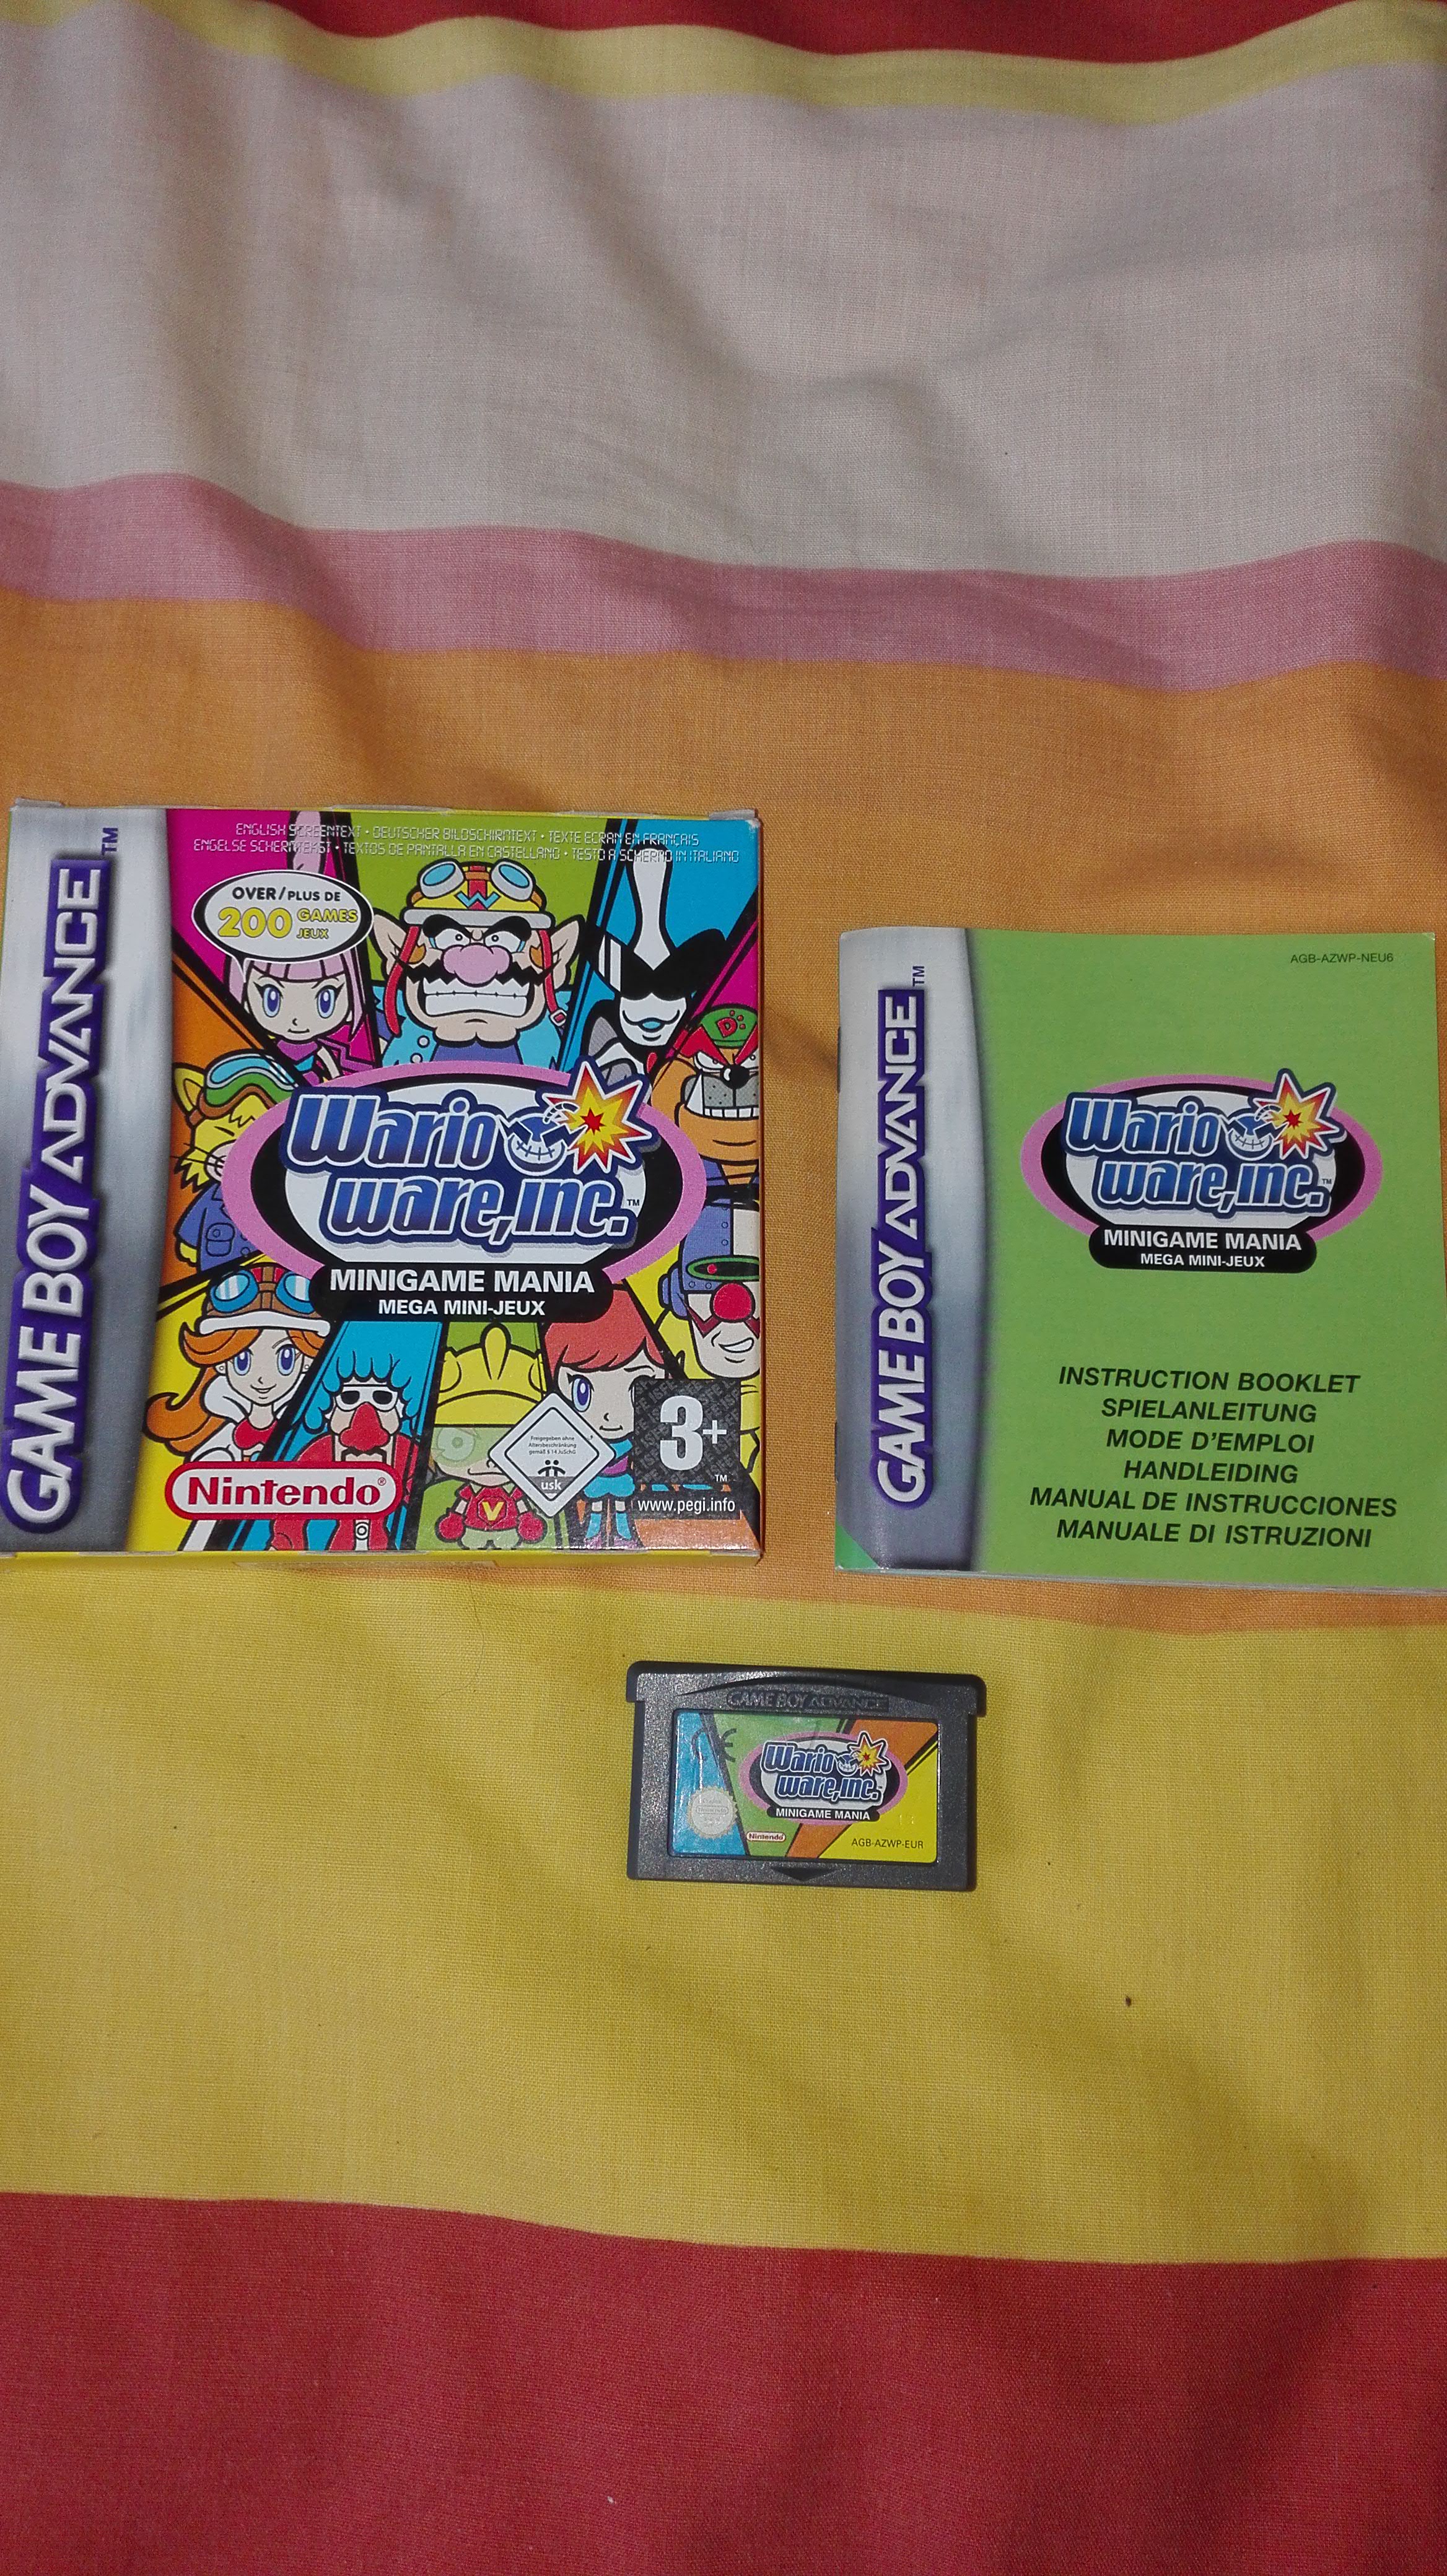 WarioWare Inc joins my game collection